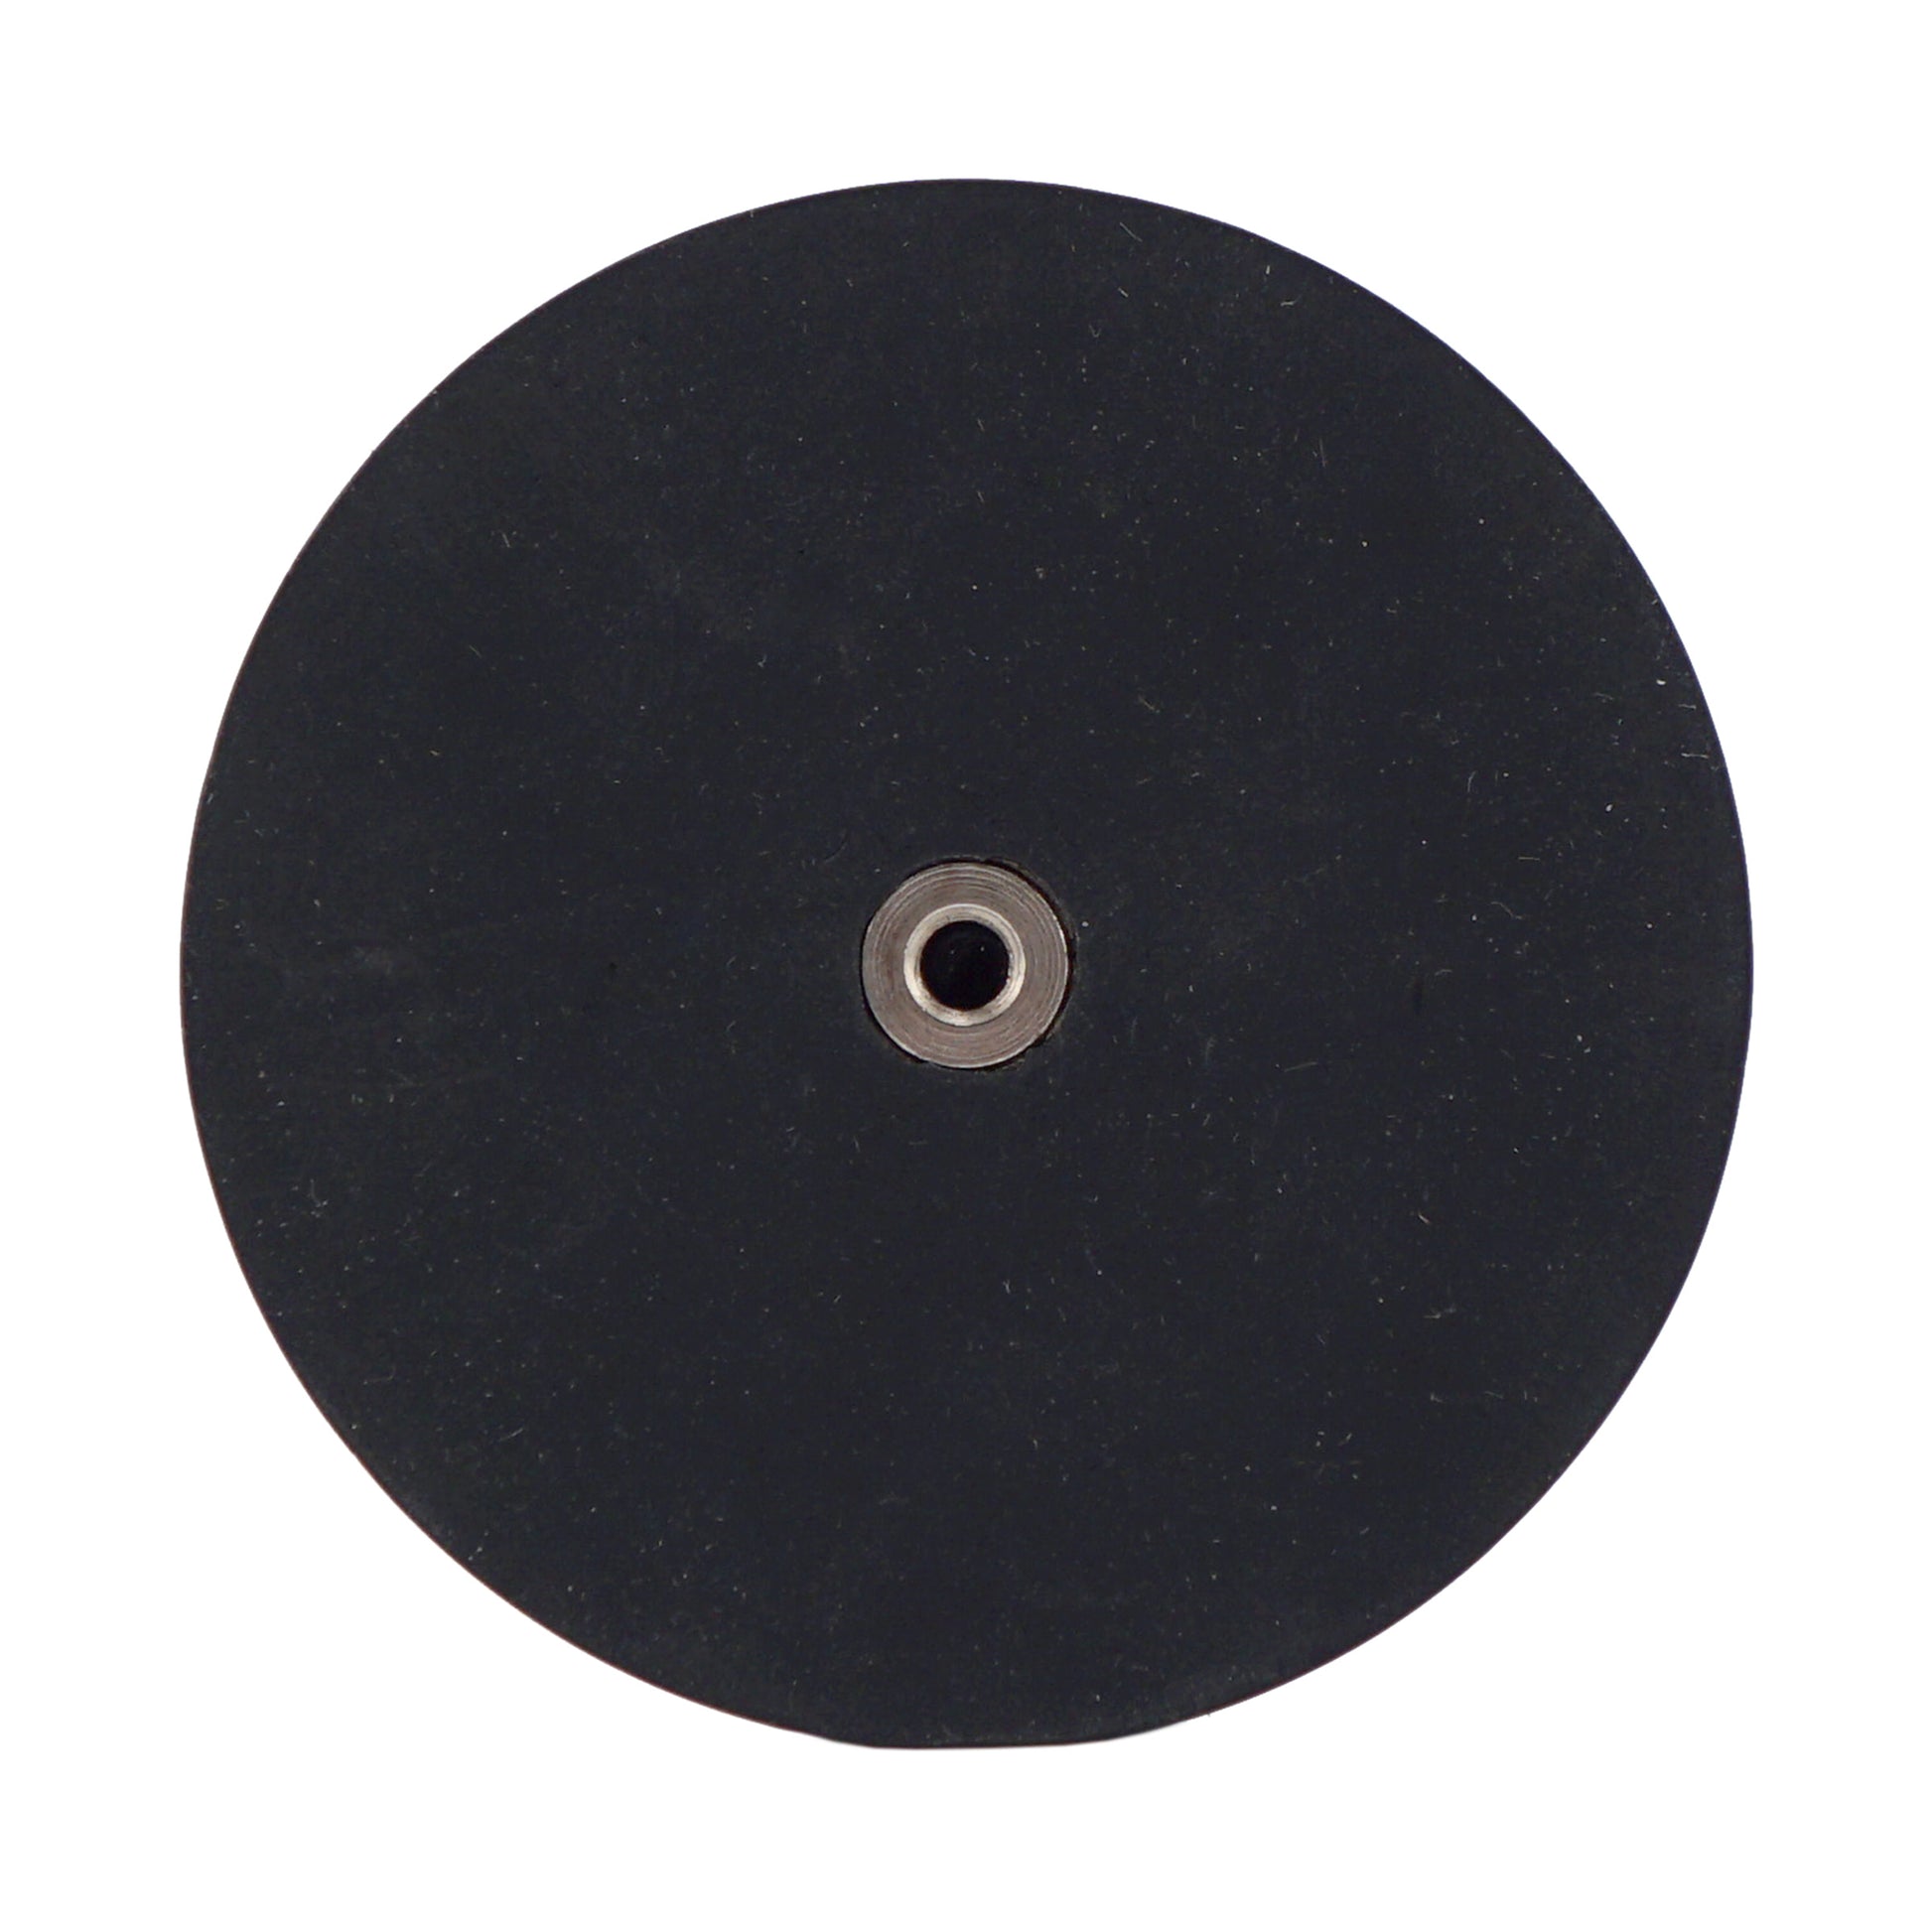 Load image into Gallery viewer, NADR351F Neodymium Rubber Coated Round Base Magnet with Female Thread - Bottom View